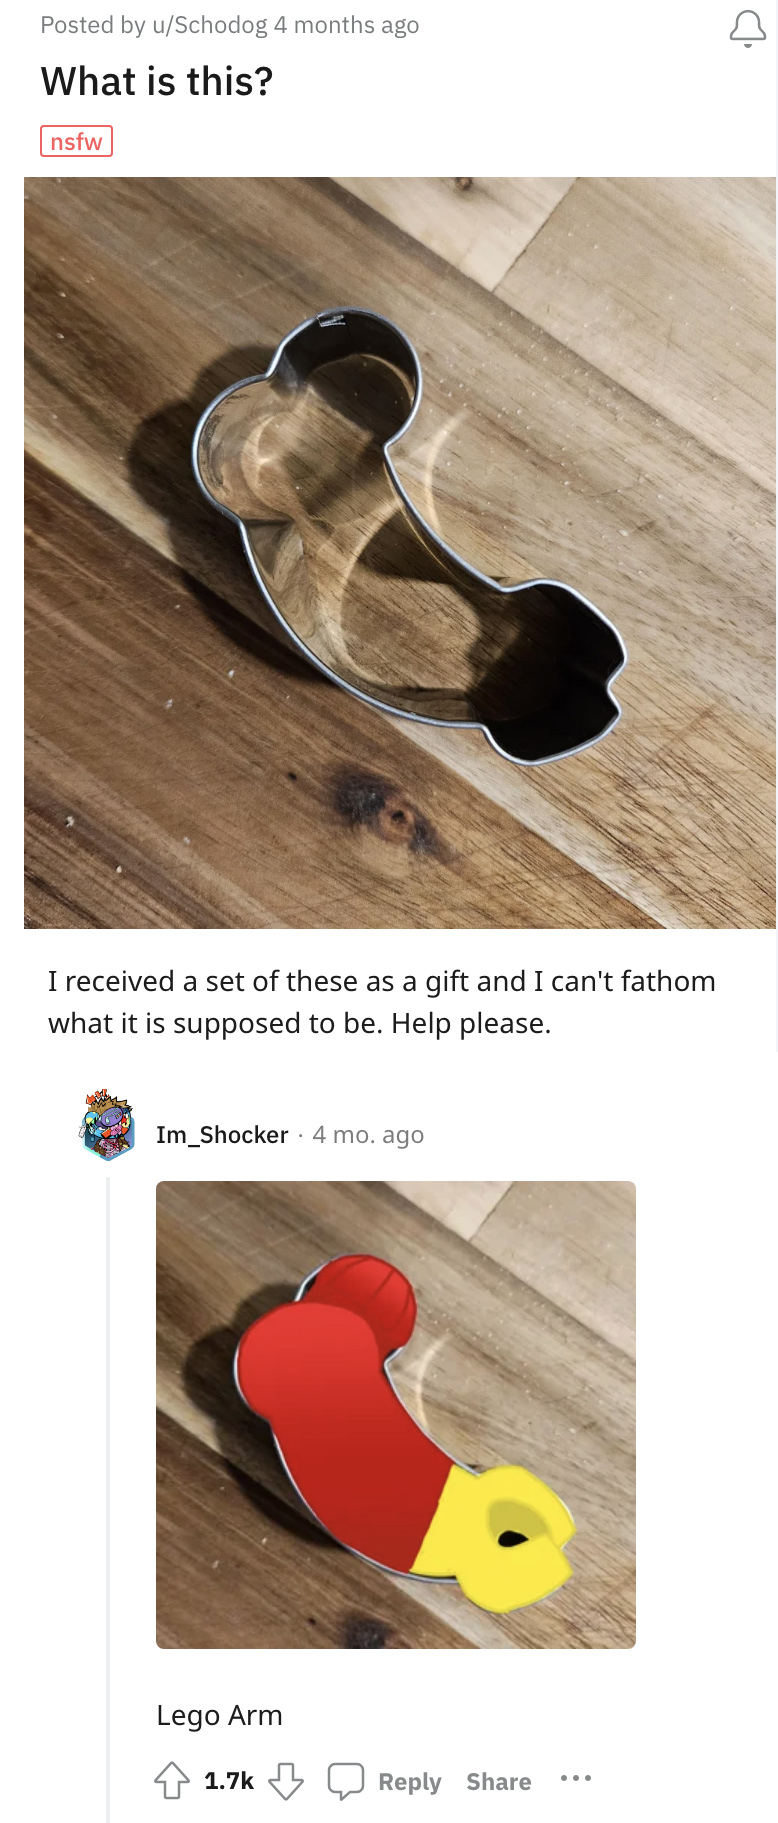 Image 1: Metal cookie cutter on wooden surface.
Image 2: Cookie cutter resembling high-heel shoe with handle